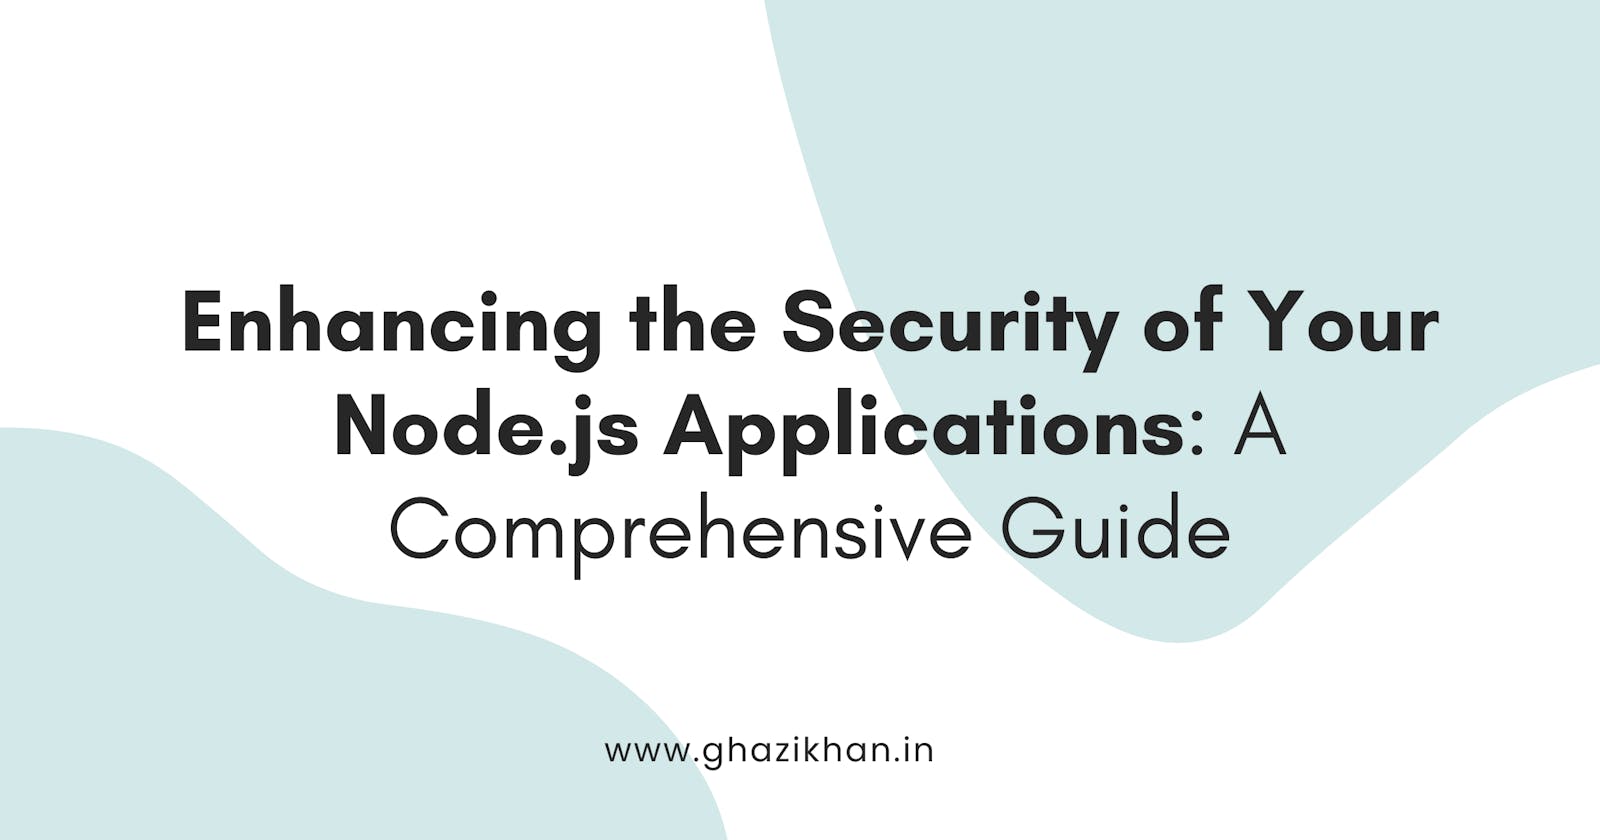 Enhancing the Security of Your Node.js Applications: A Comprehensive Guide